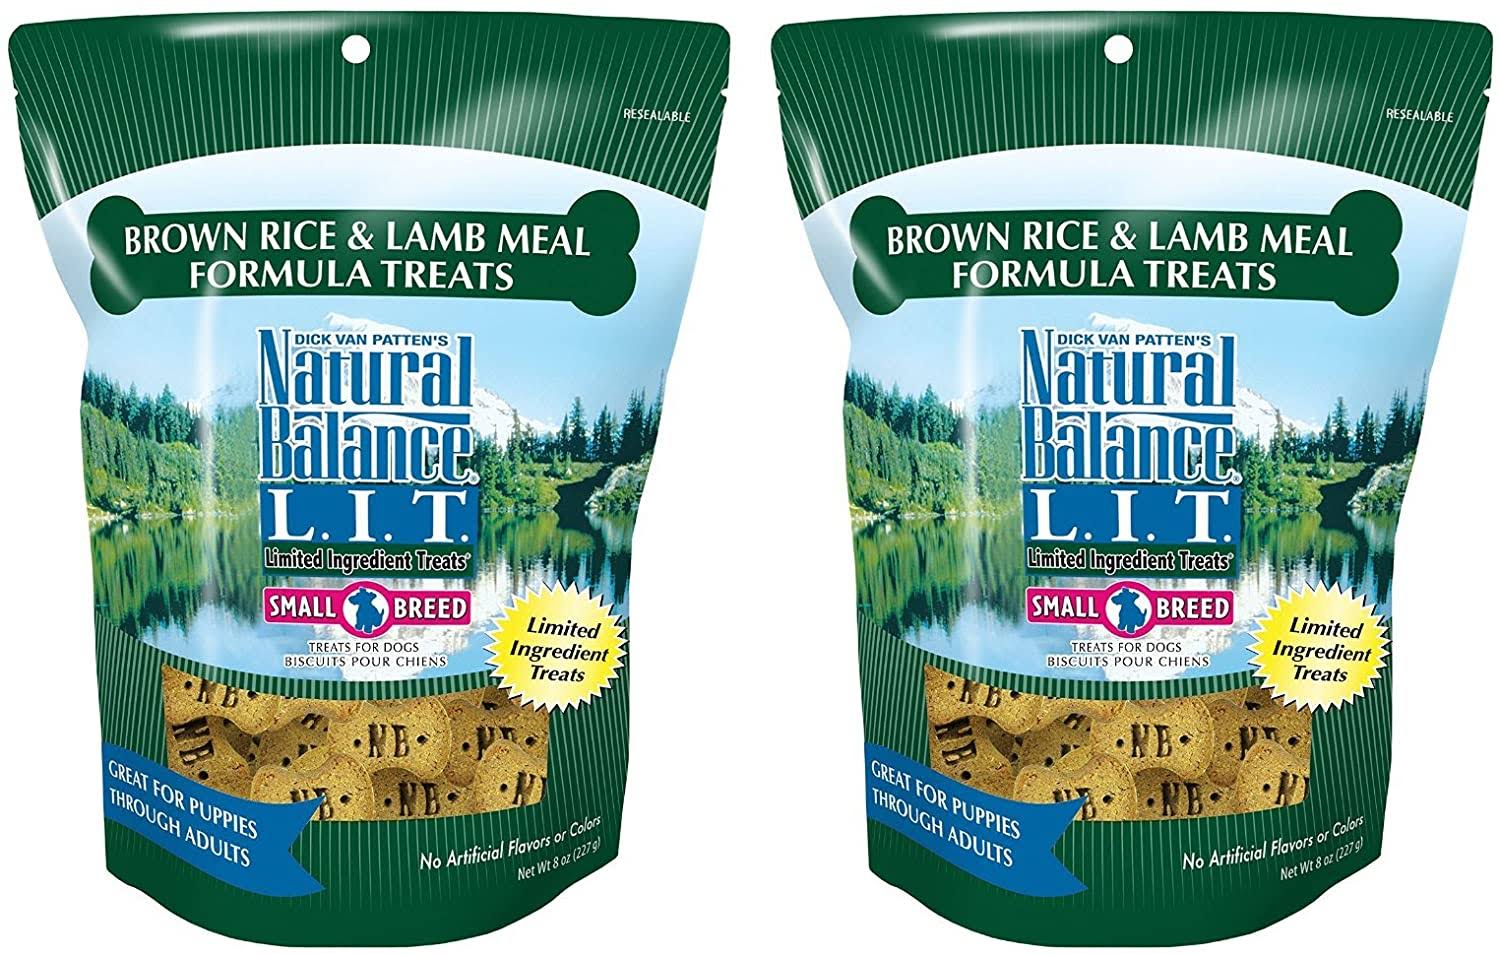 Natural Balance Limited Ingredient Treats for Dogs - Brown Rice and Lamb Meal Formula, 8oz